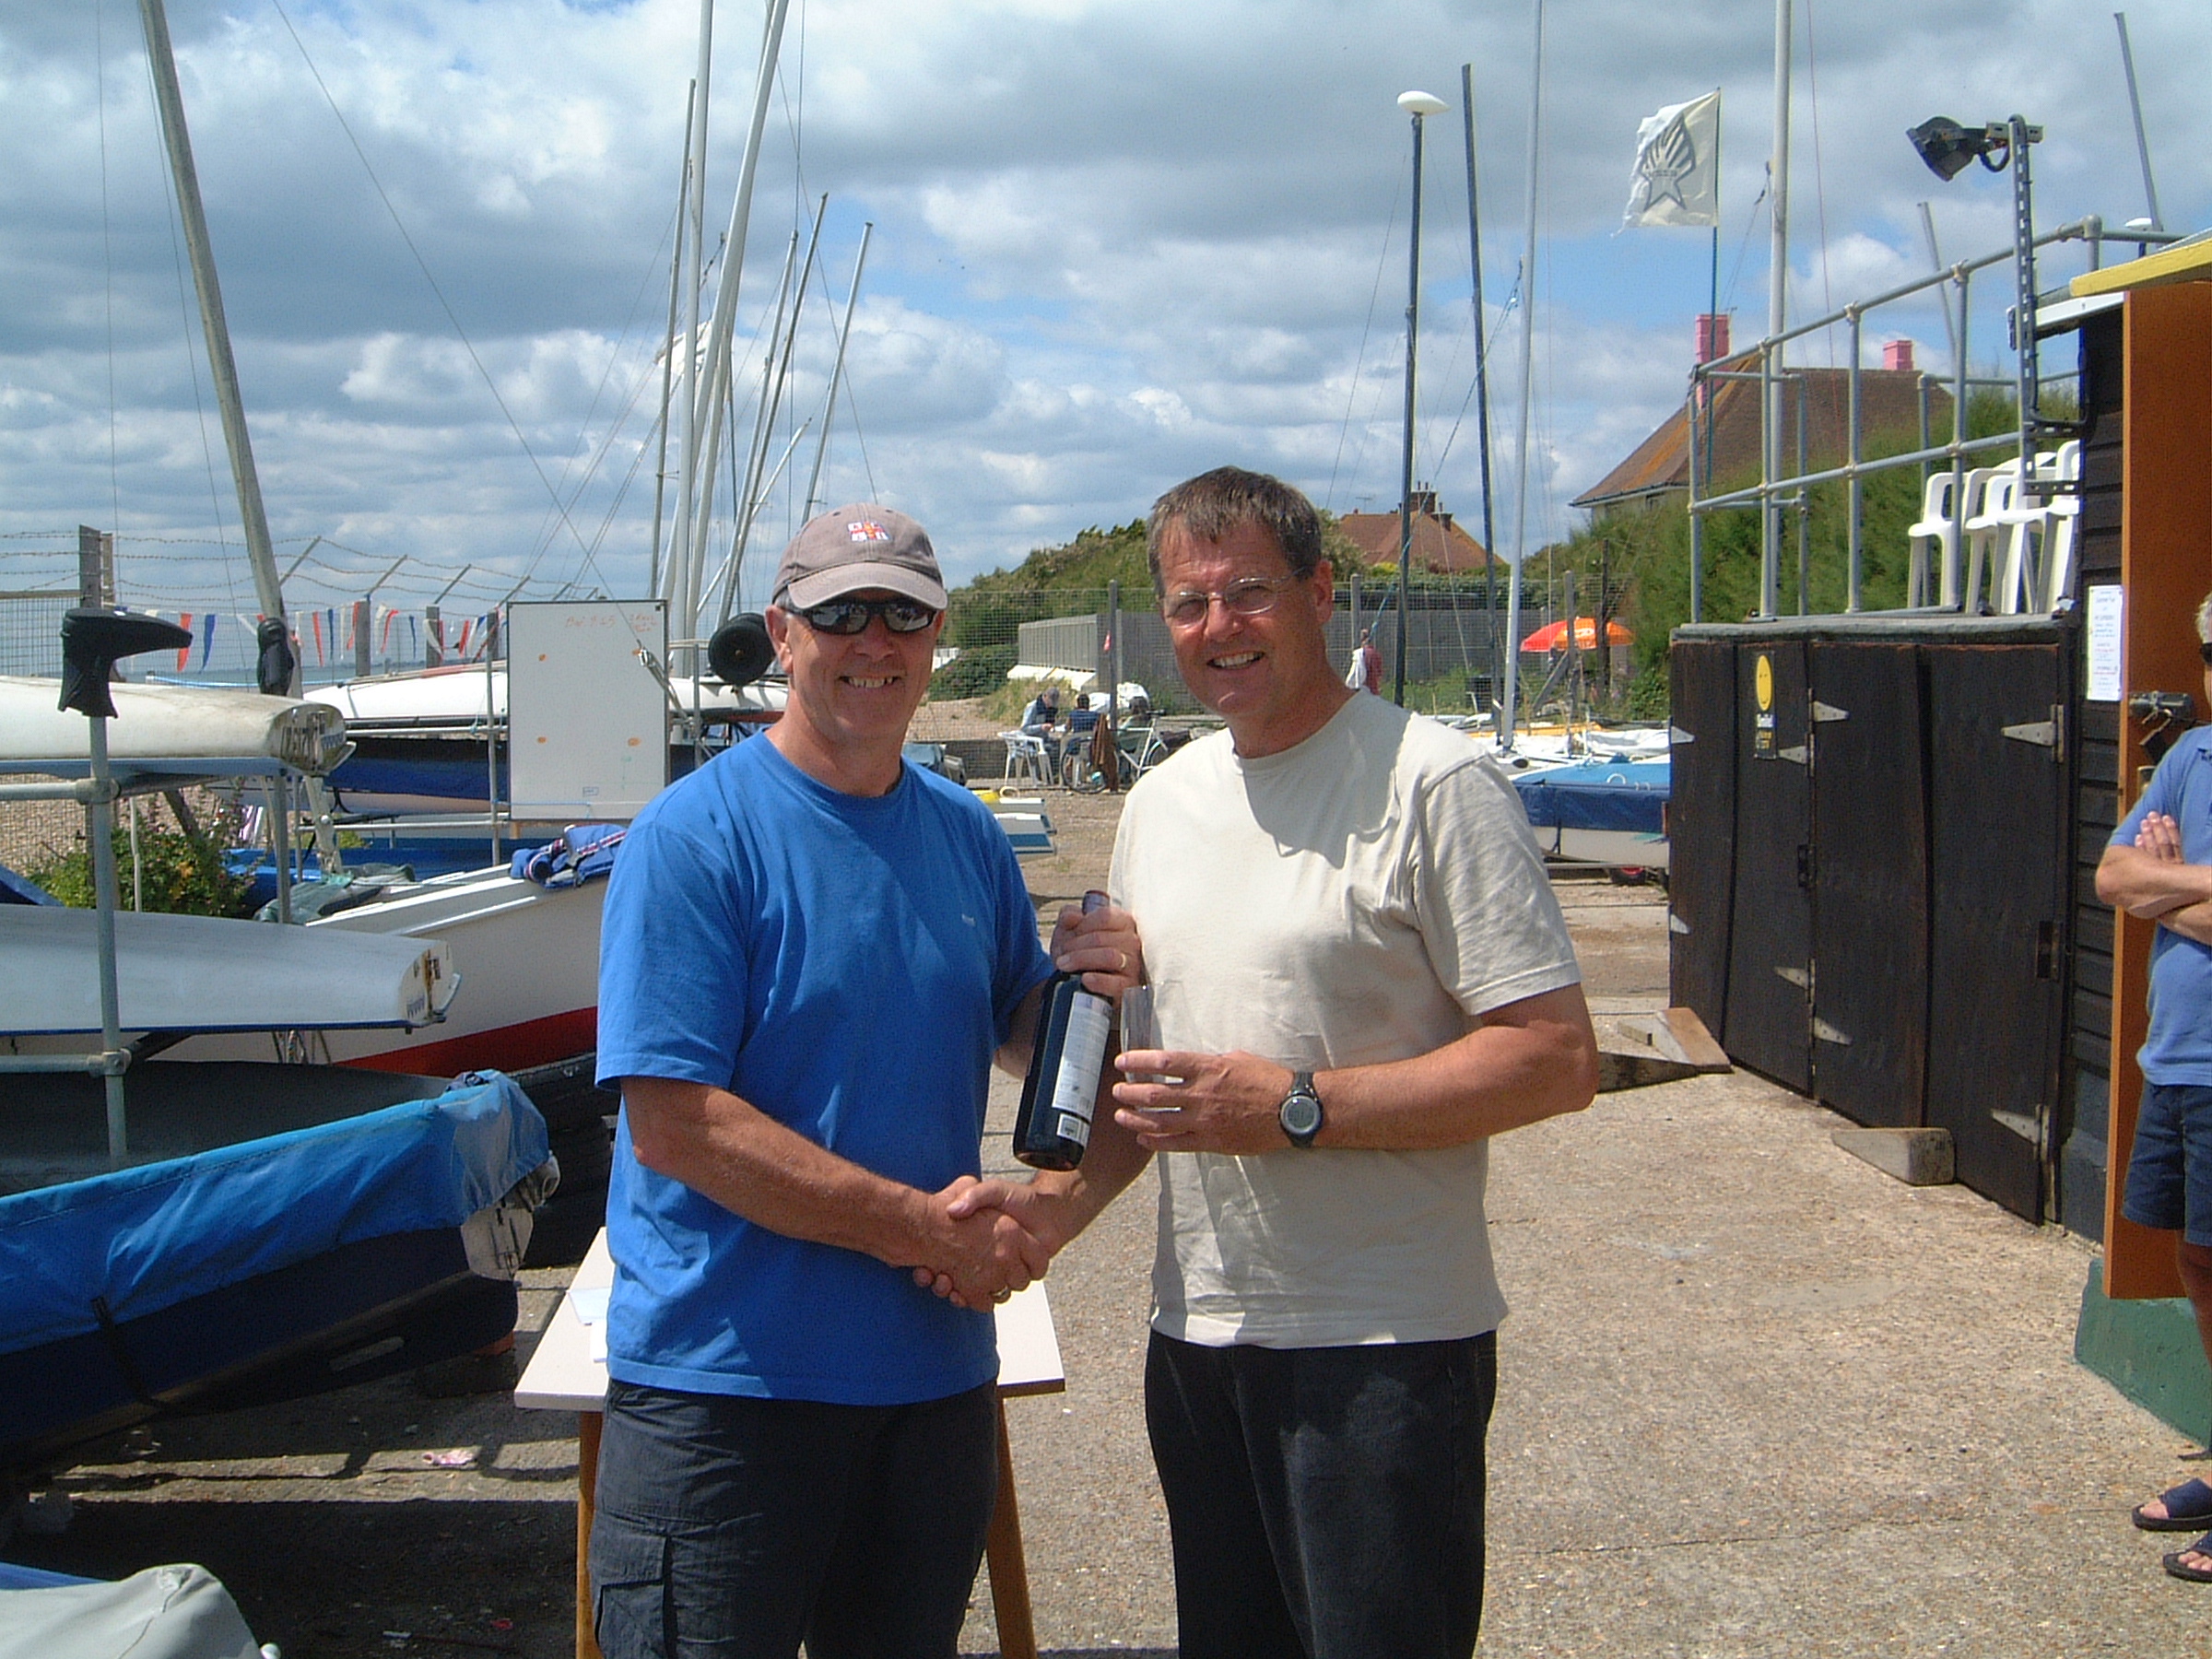 Erling Holmberg Winner of the Southern Area Championship